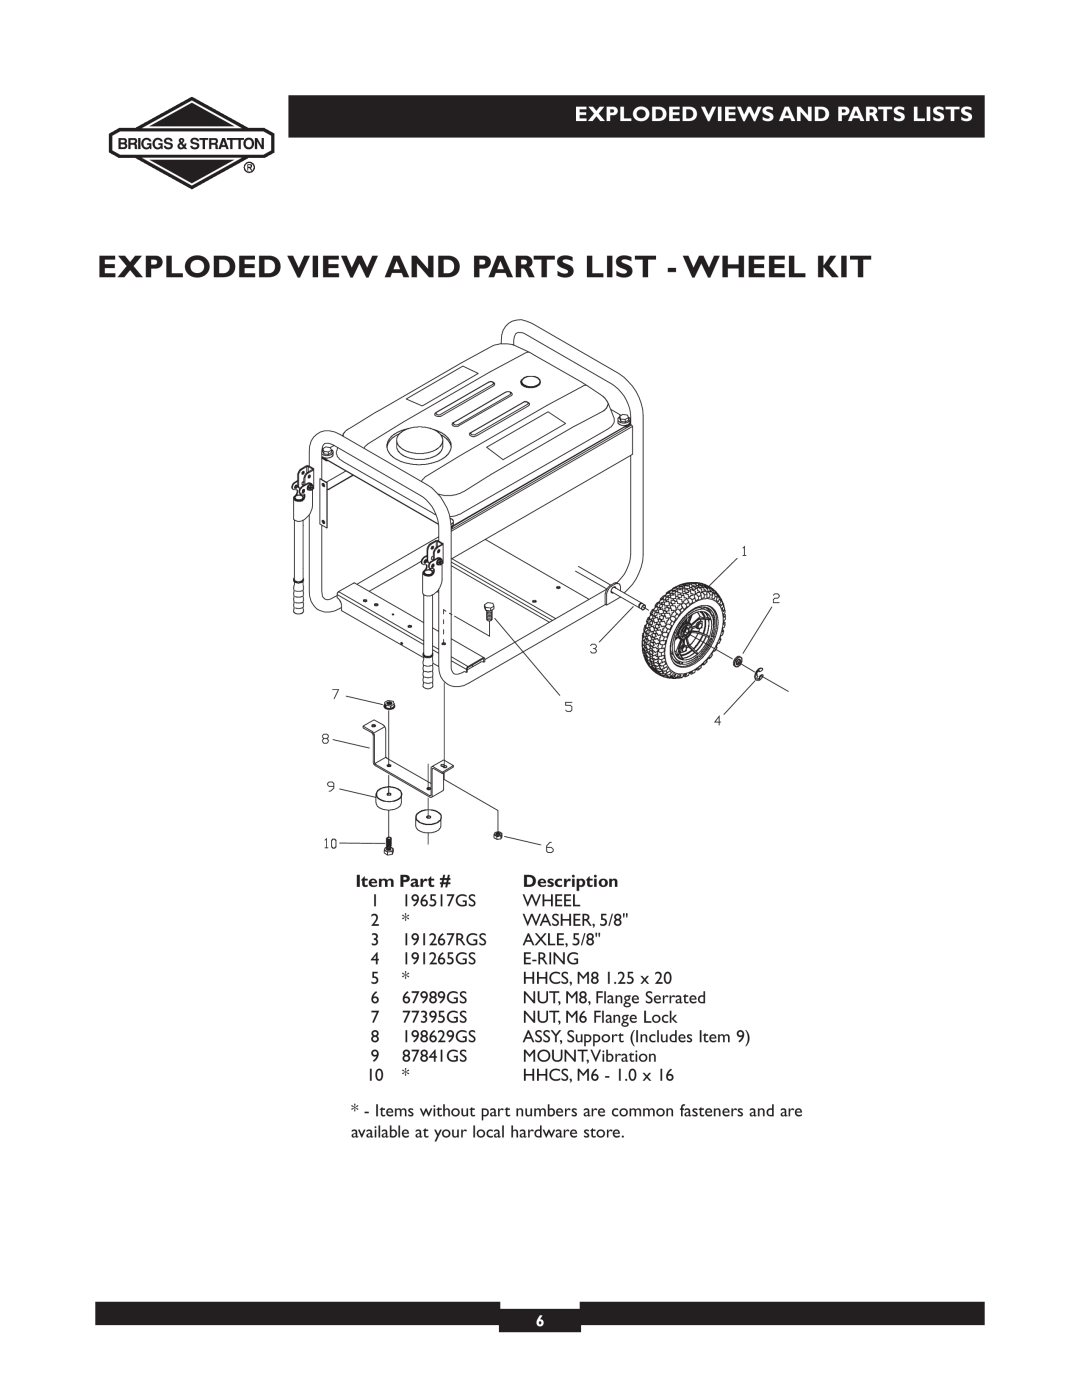 Briggs & Stratton 30244 manual Exploded View And Parts List - Wheel Kit, Exploded Views And Parts Lists, Description 